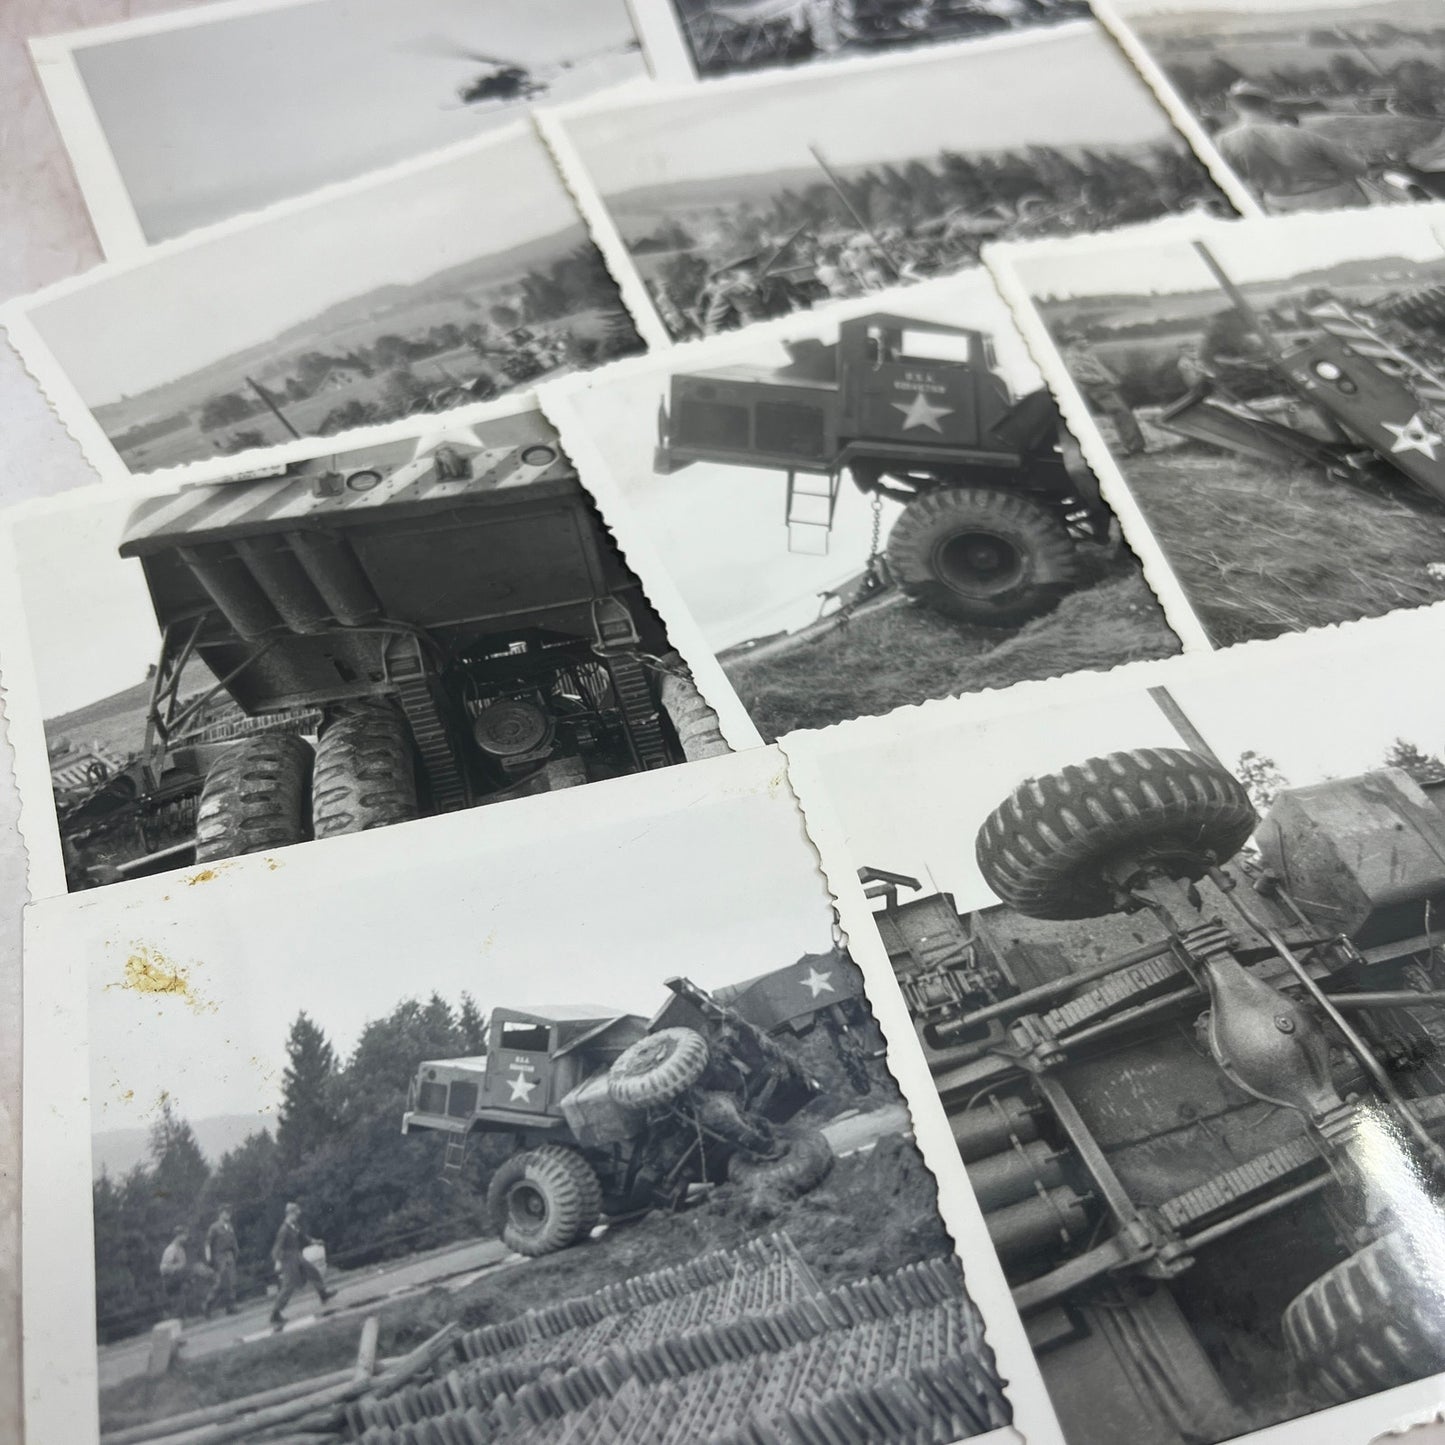 Lot of 17 Photos Overturned Army Vehicle Postwar Germany c1954 Army TG7-AP4